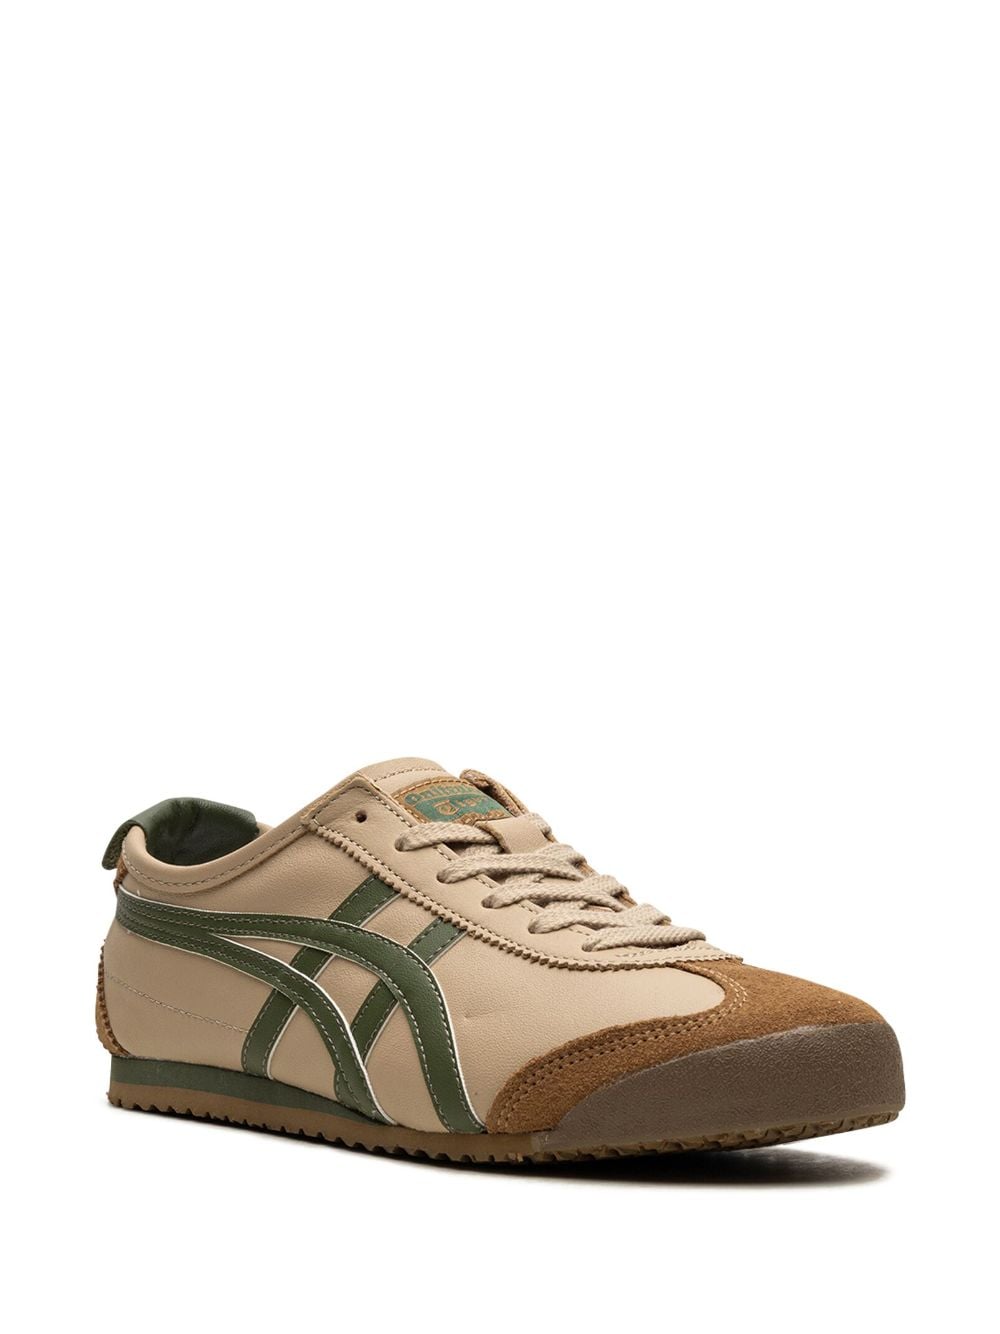 Shop Onitsuka Tiger Mexico 66™ "beige Grass Green" Sneakers